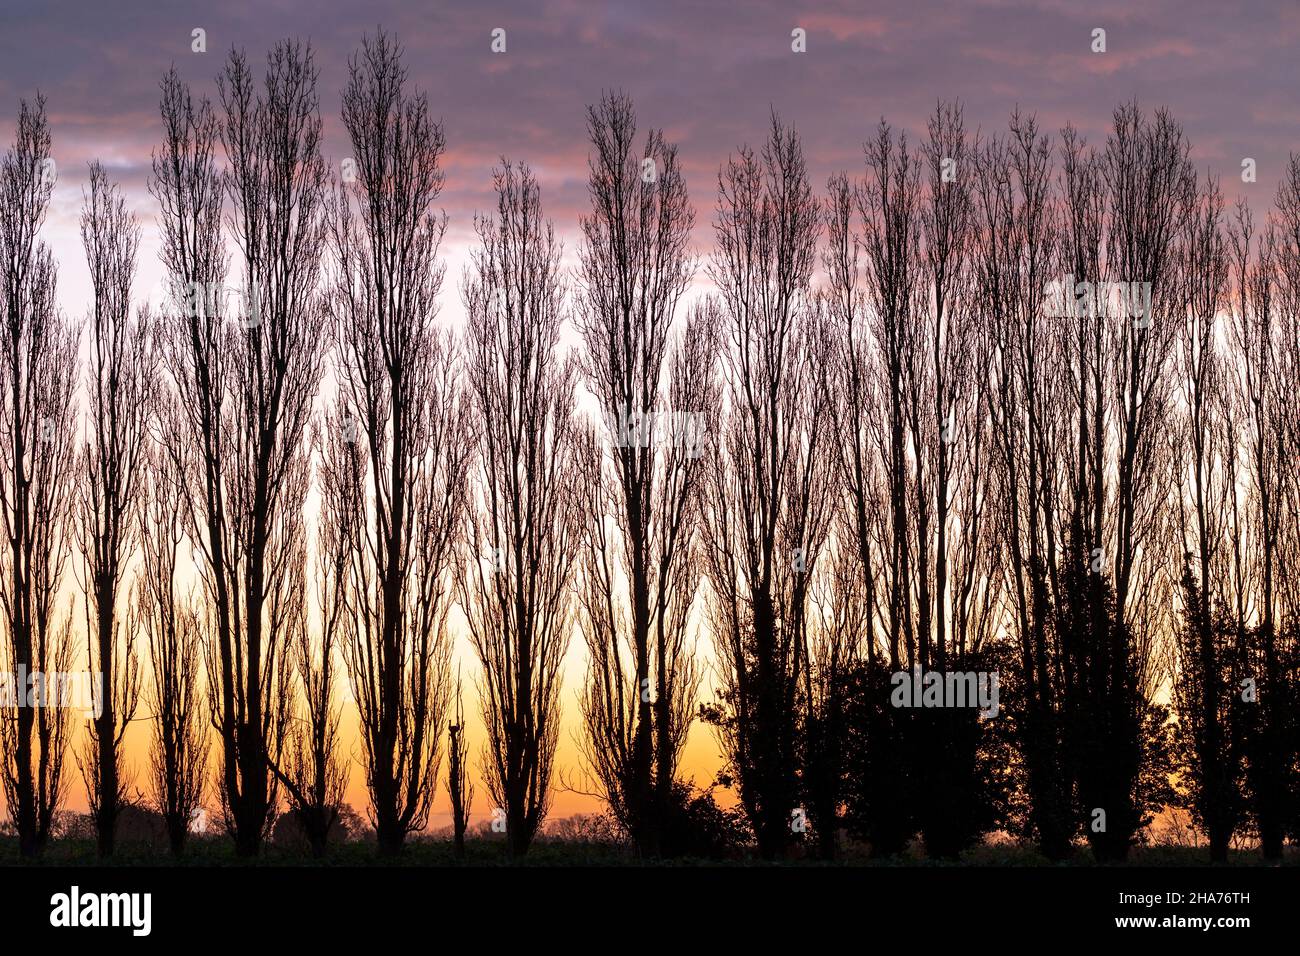 Twilight and dawn sky behind a row of leafless poplar trees in the early morning at day break. Faint yellow sky with grey clouds above that underlit by touches of purple. Winter. Stock Photo